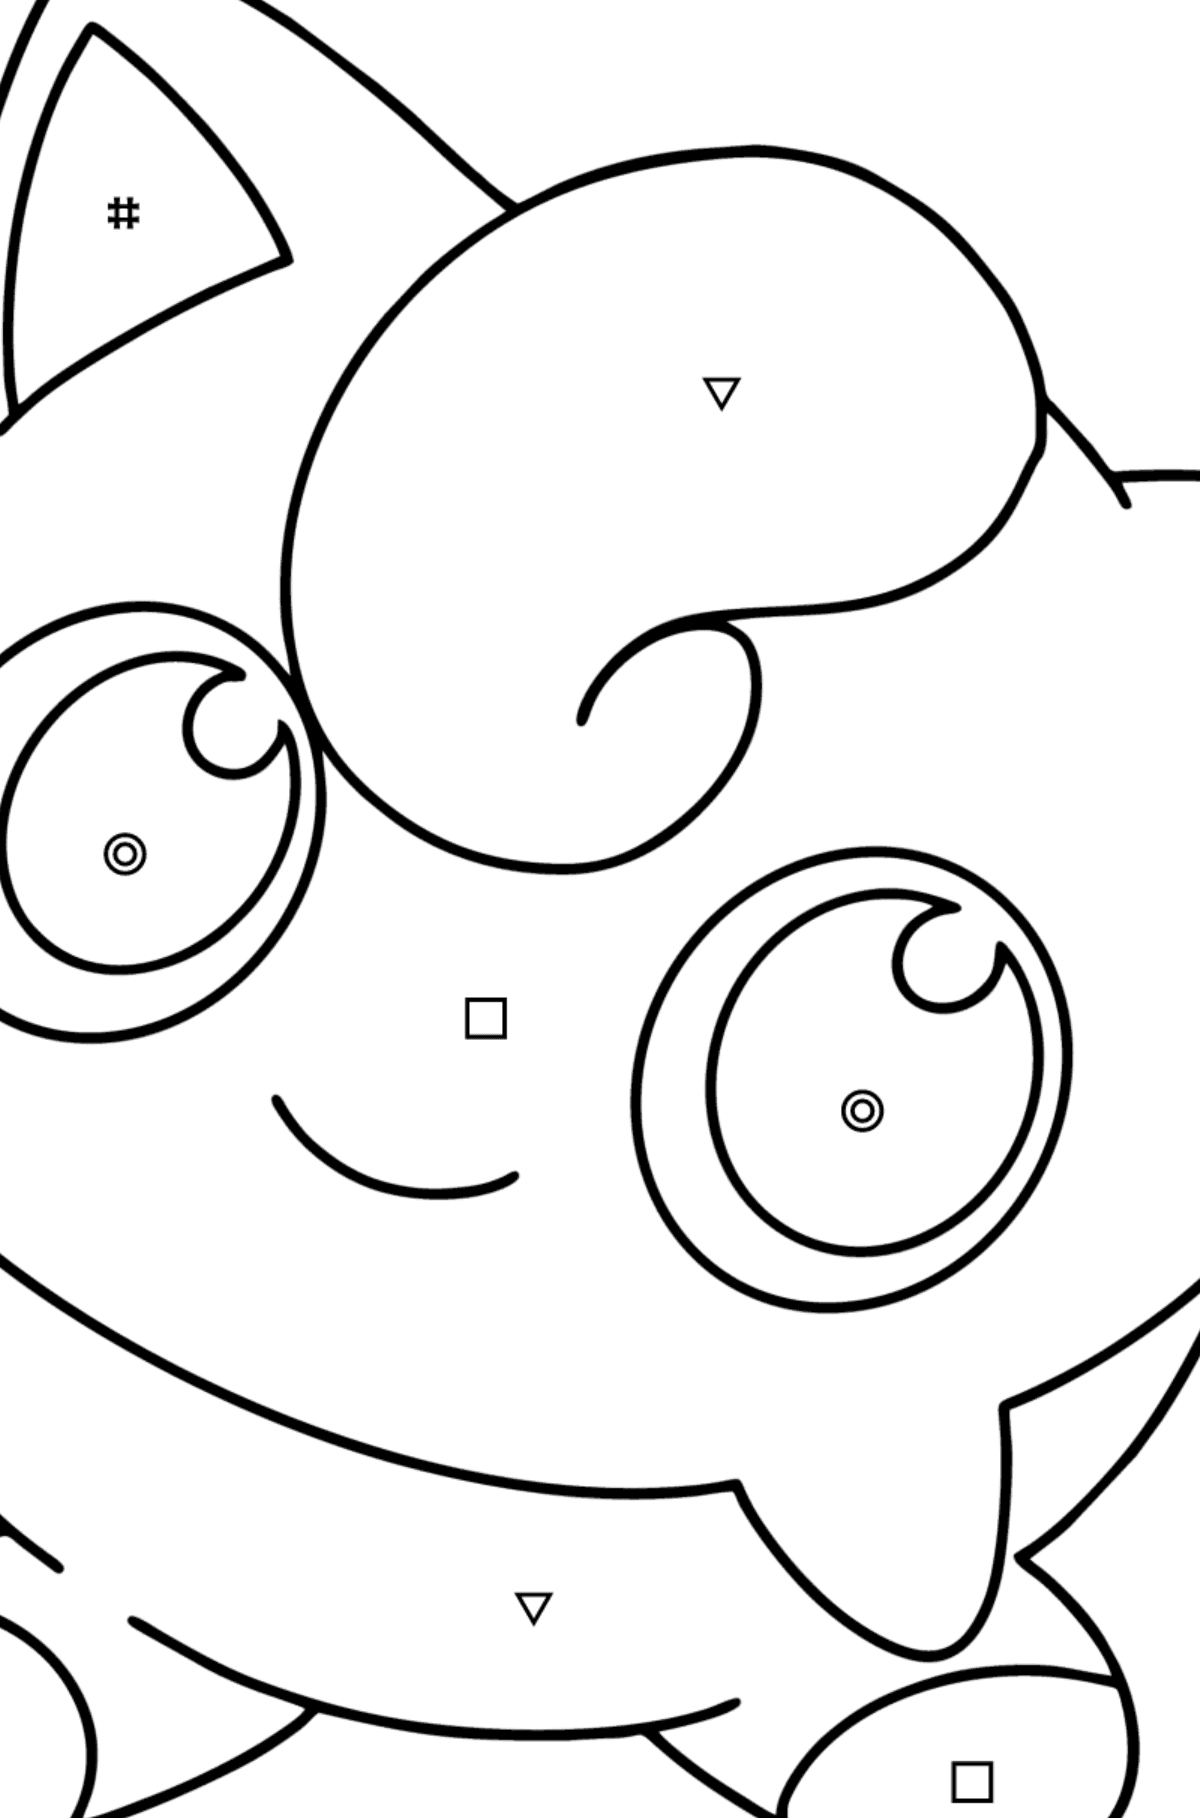 Coloring page Pokémon Go Jigglypuff - Coloring by Symbols and Geometric Shapes for Kids